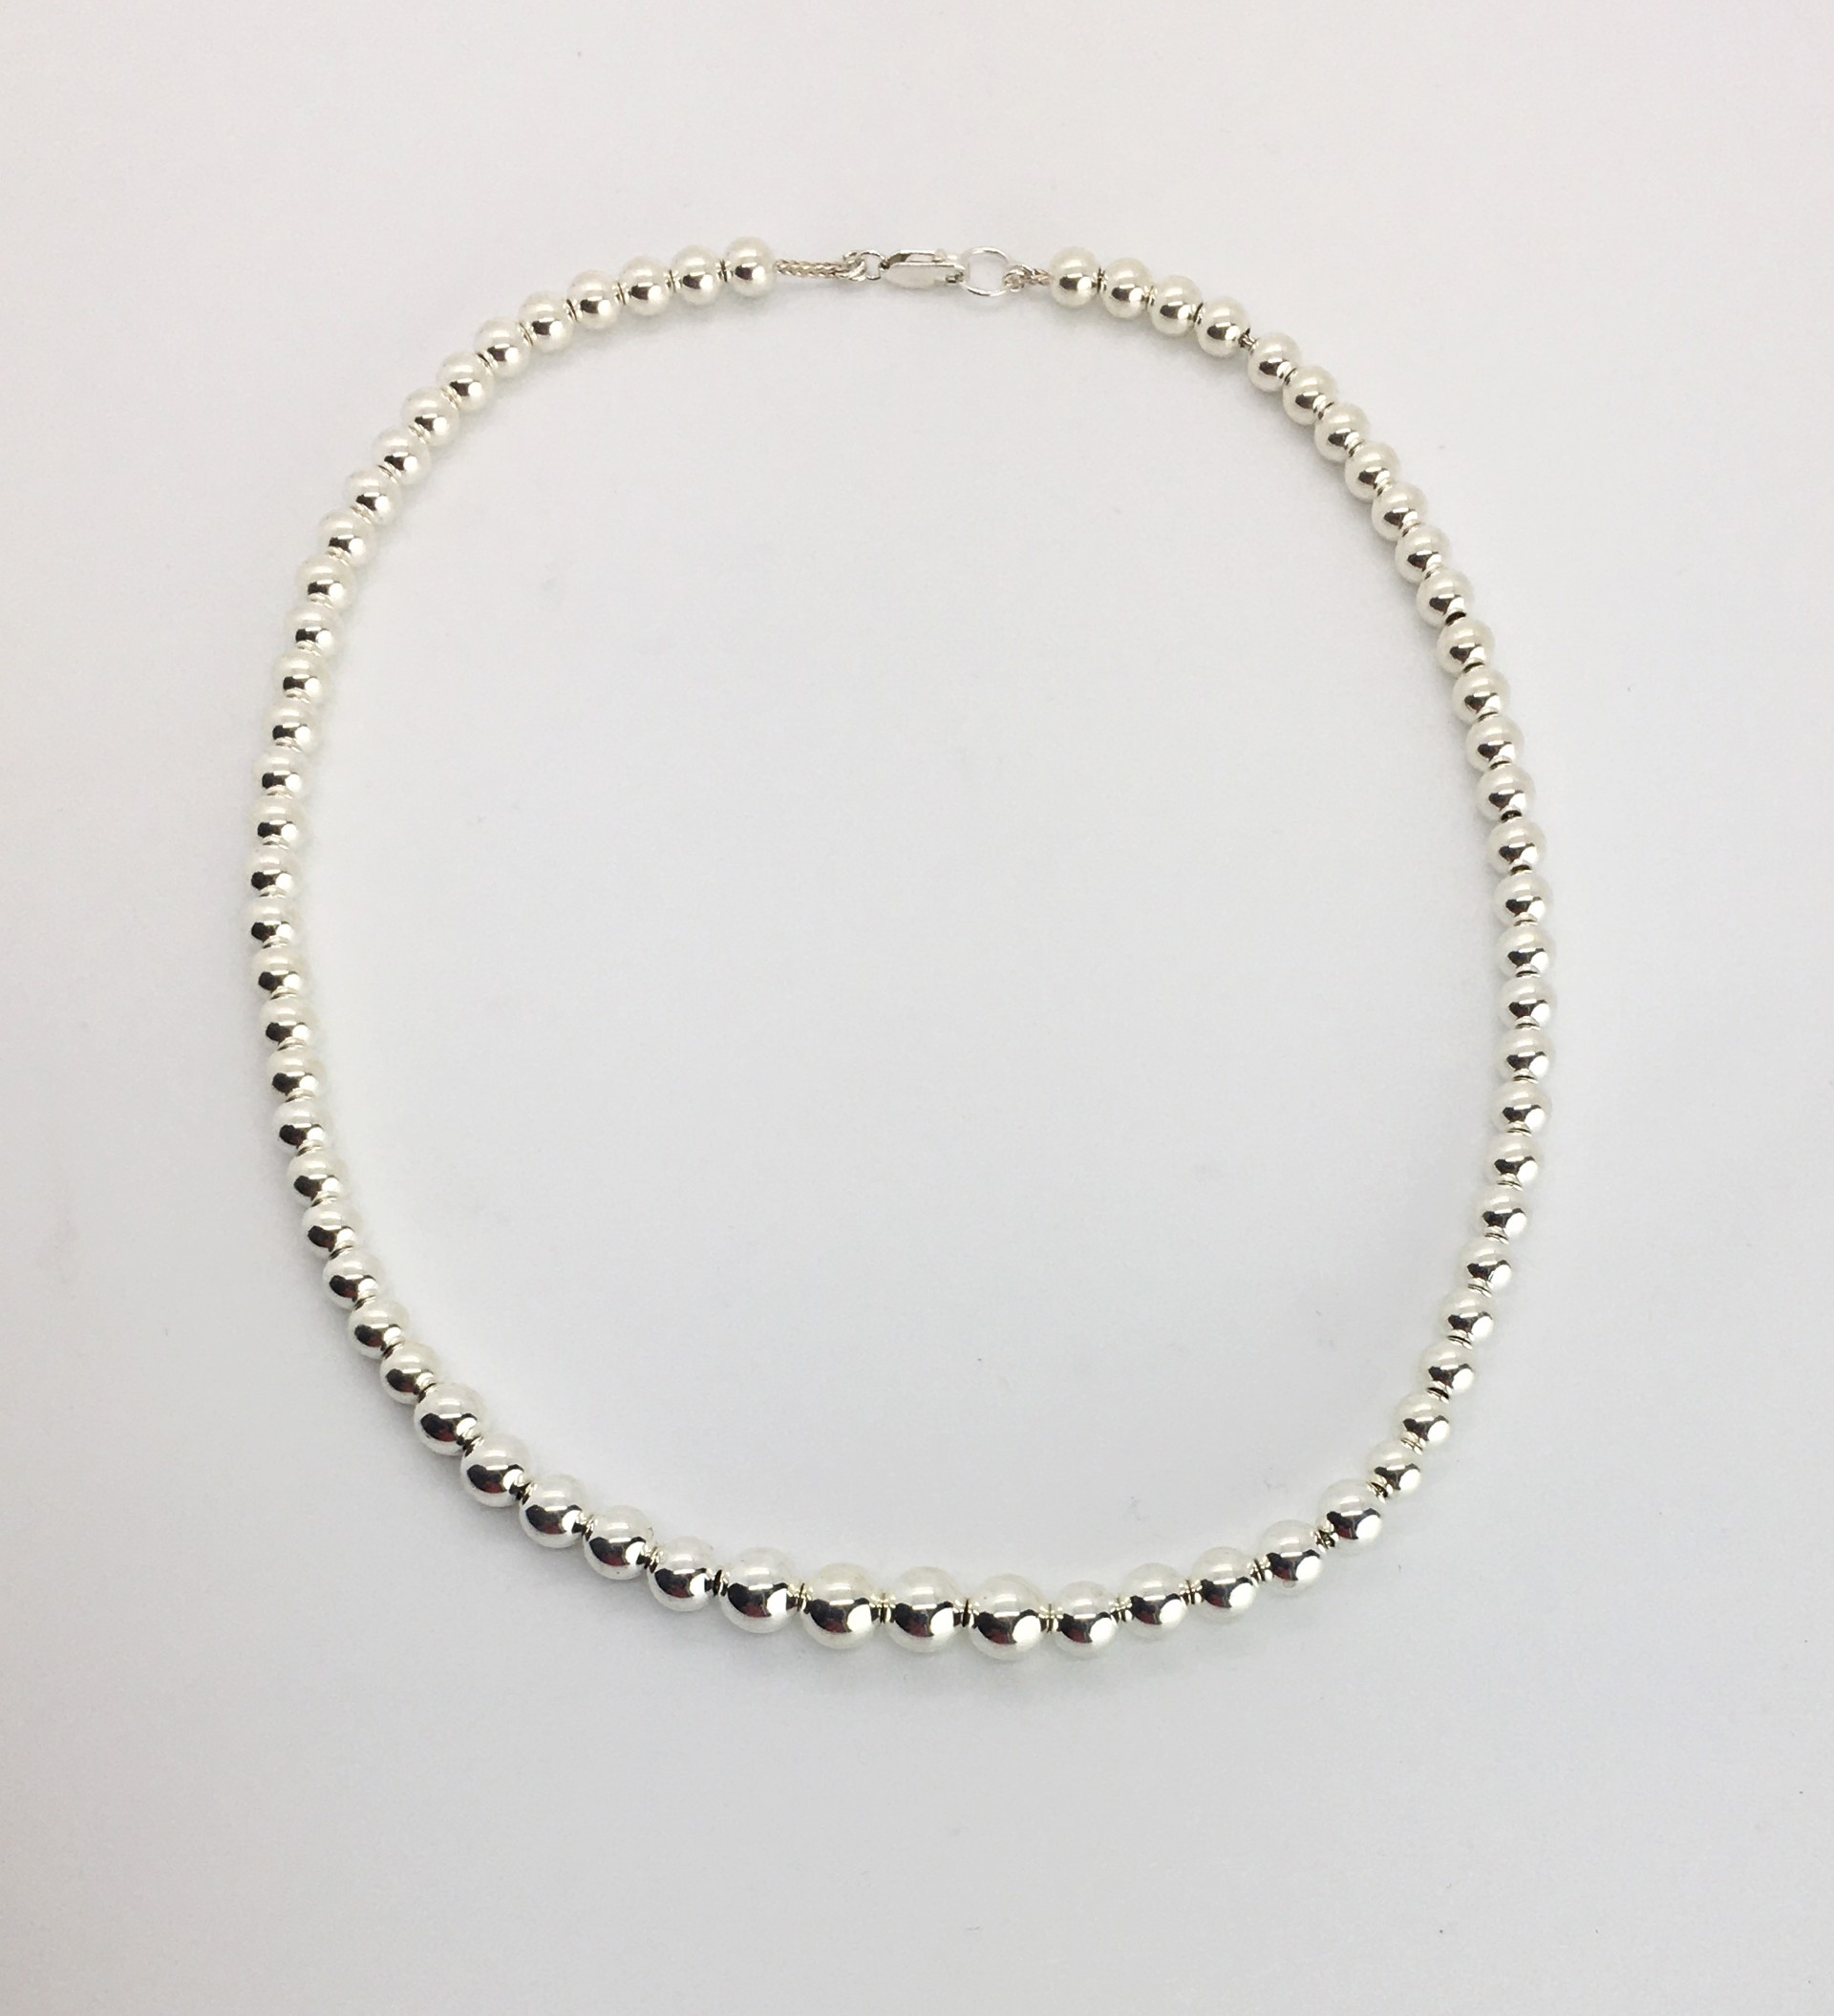 17" Graduated Sterling Silver Beaded Necklace - 6-8mm by Suzanne Woodworth